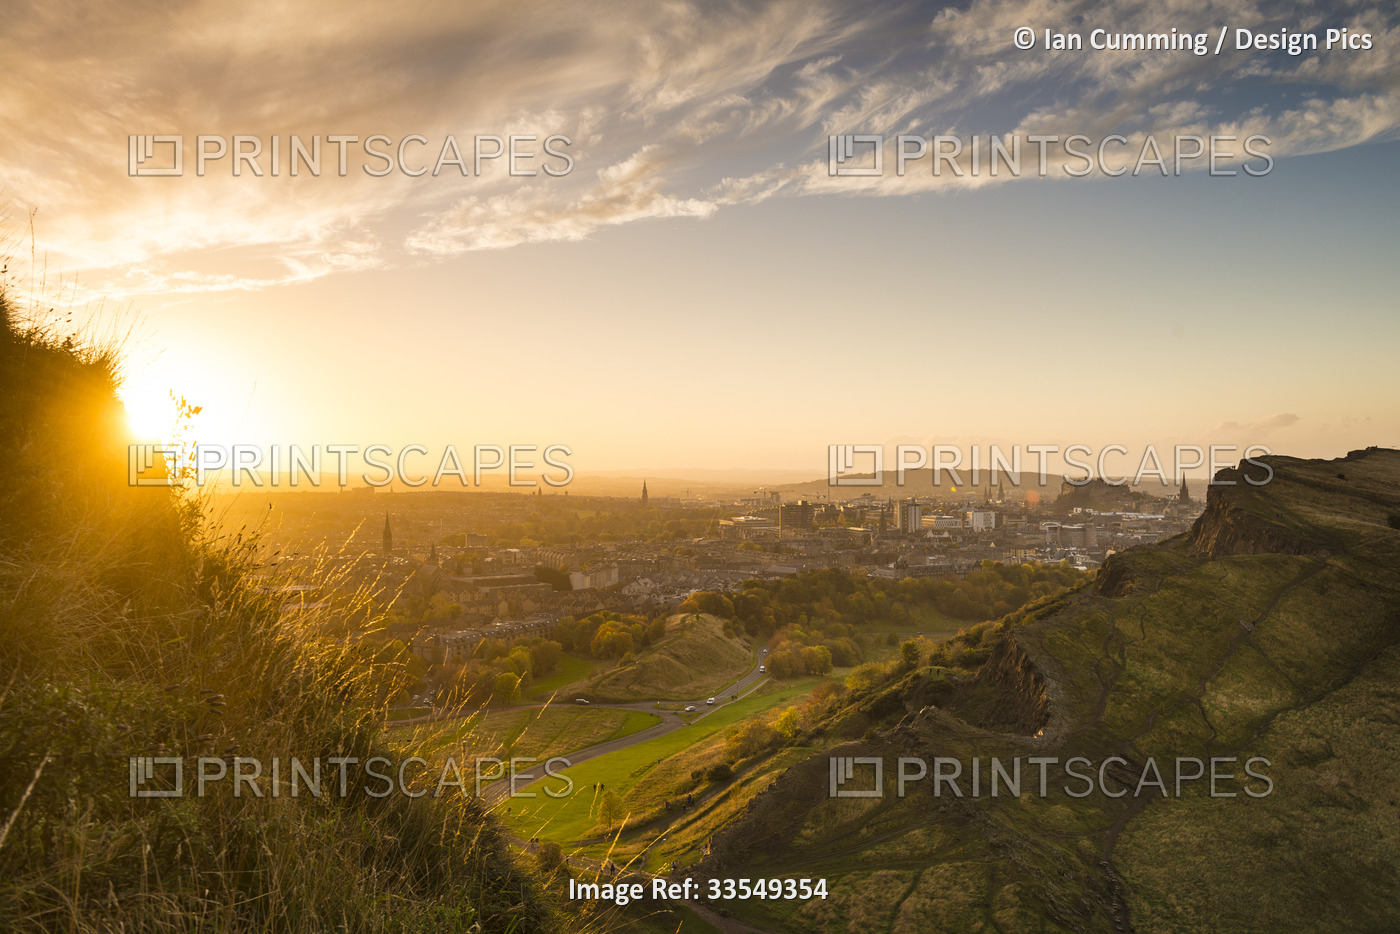 Looking across from Arthur's Seat to Edinburgh Castle and city in the distance ...